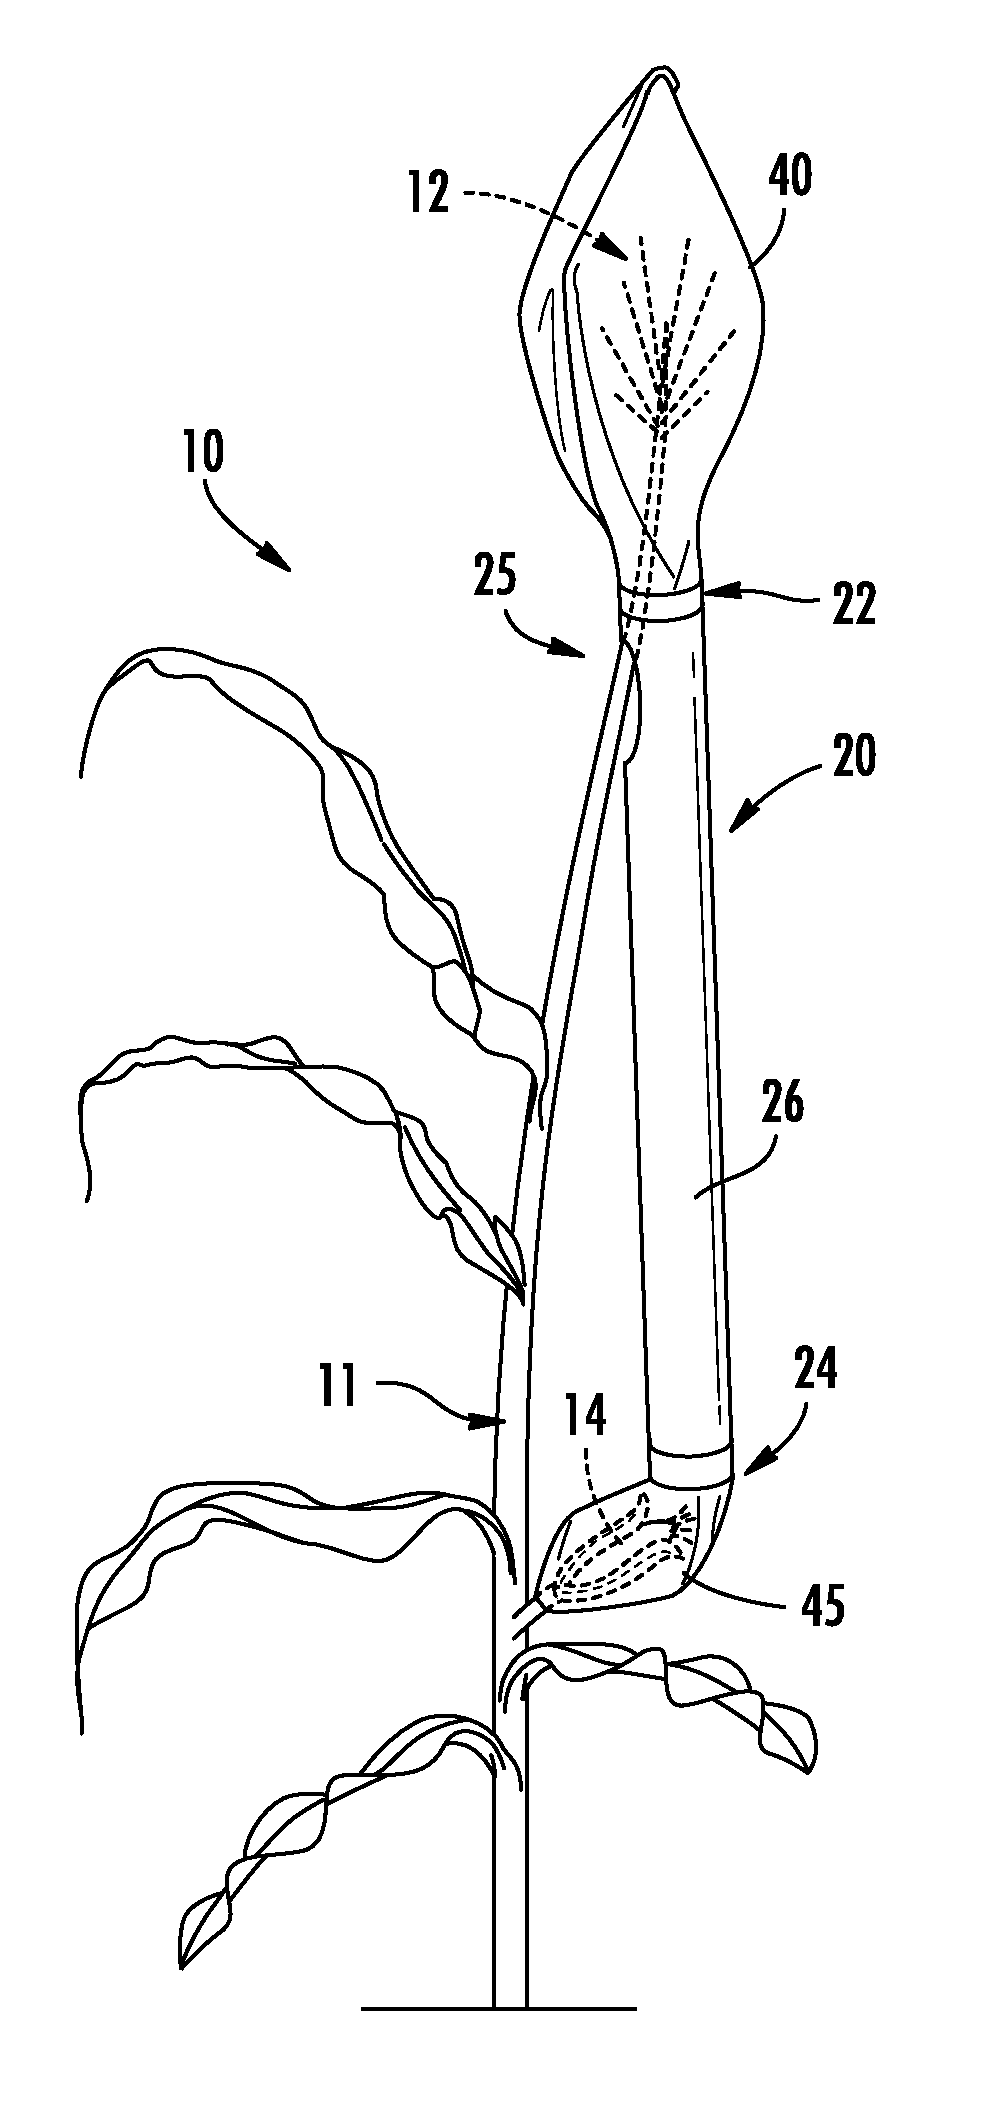 Apparatus and method for delivering pollen for directed pollination of plants